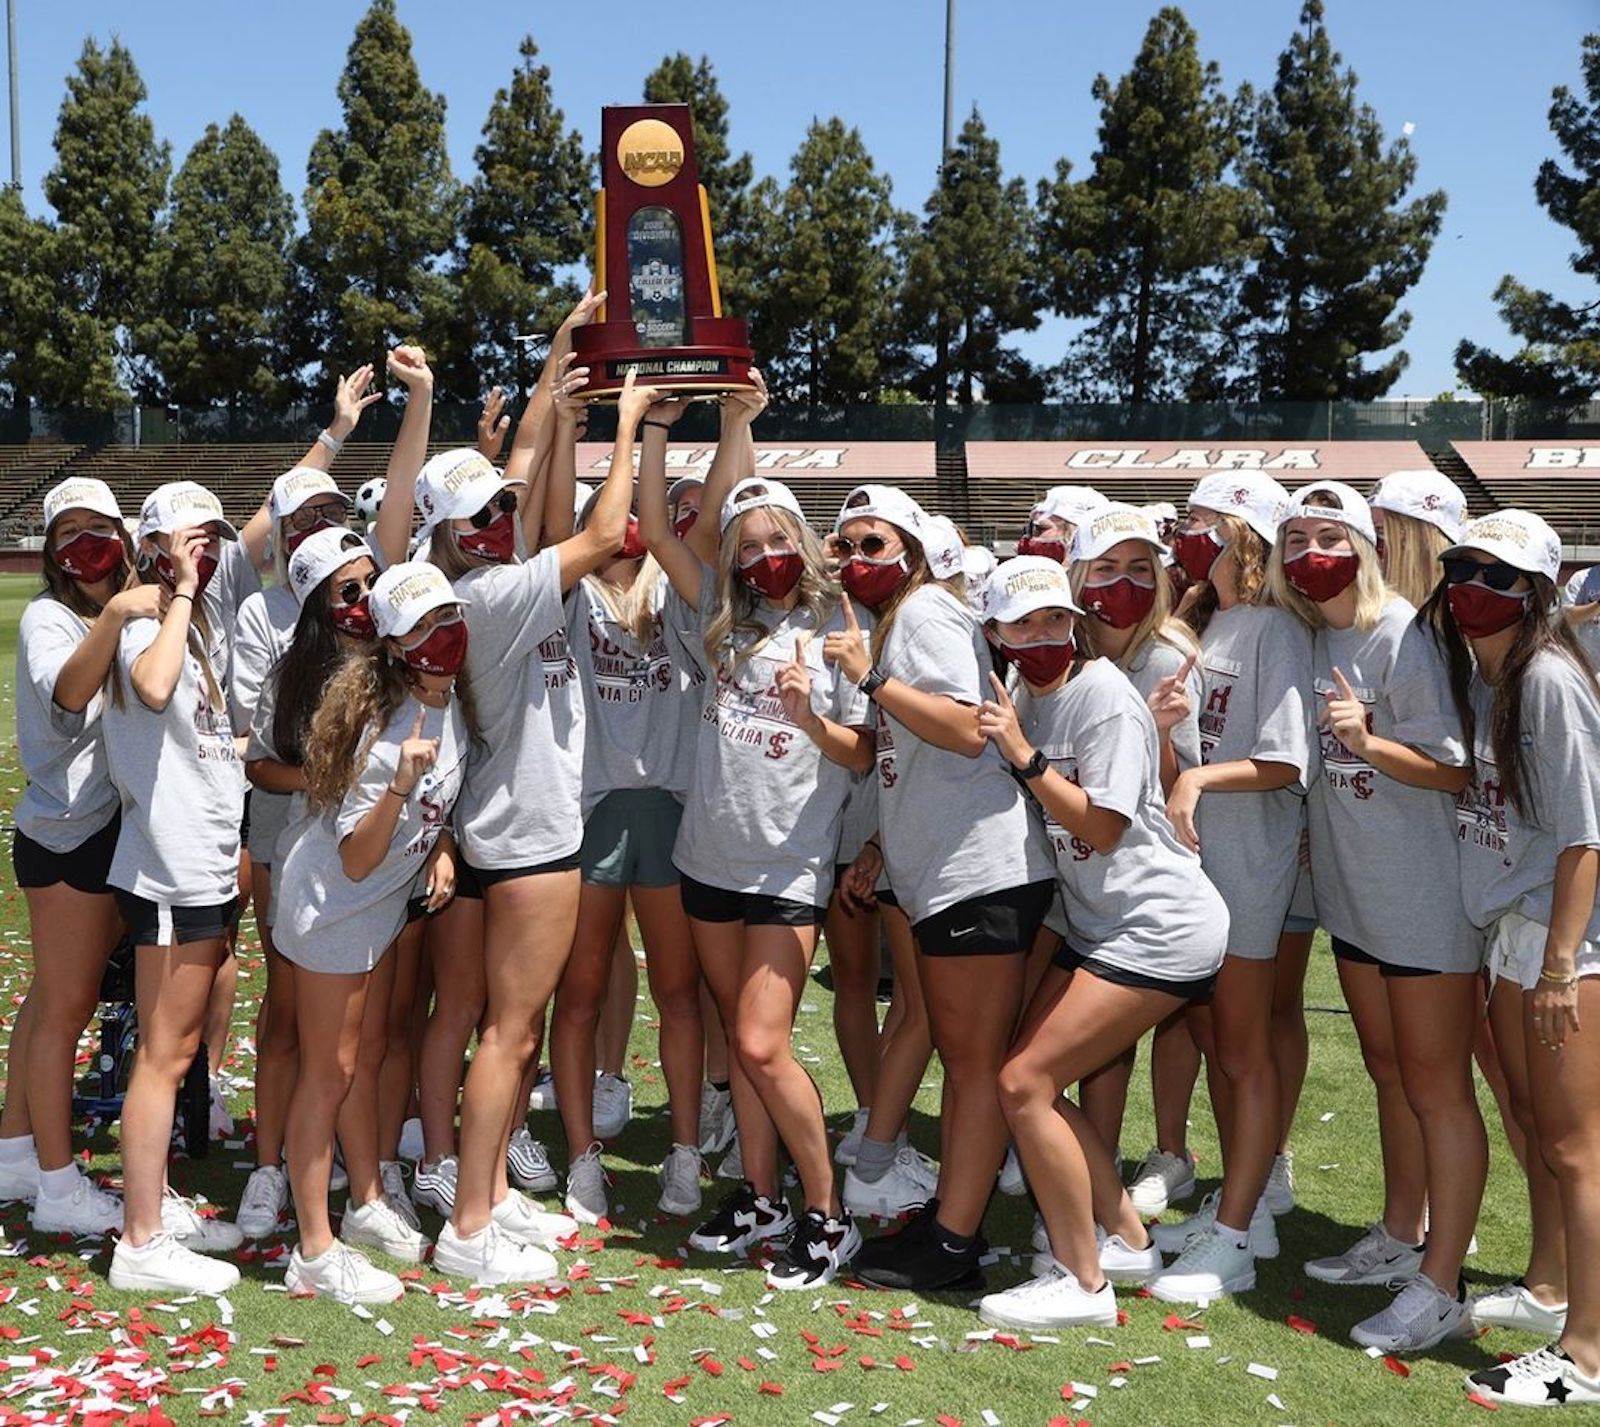 SCU Women's Soccer National Champions 2020 with the championship trophy at Stevens Stadium - SCU Women's Soccer National Champions 2020 with their trophy at Stevens Stadium Link to file